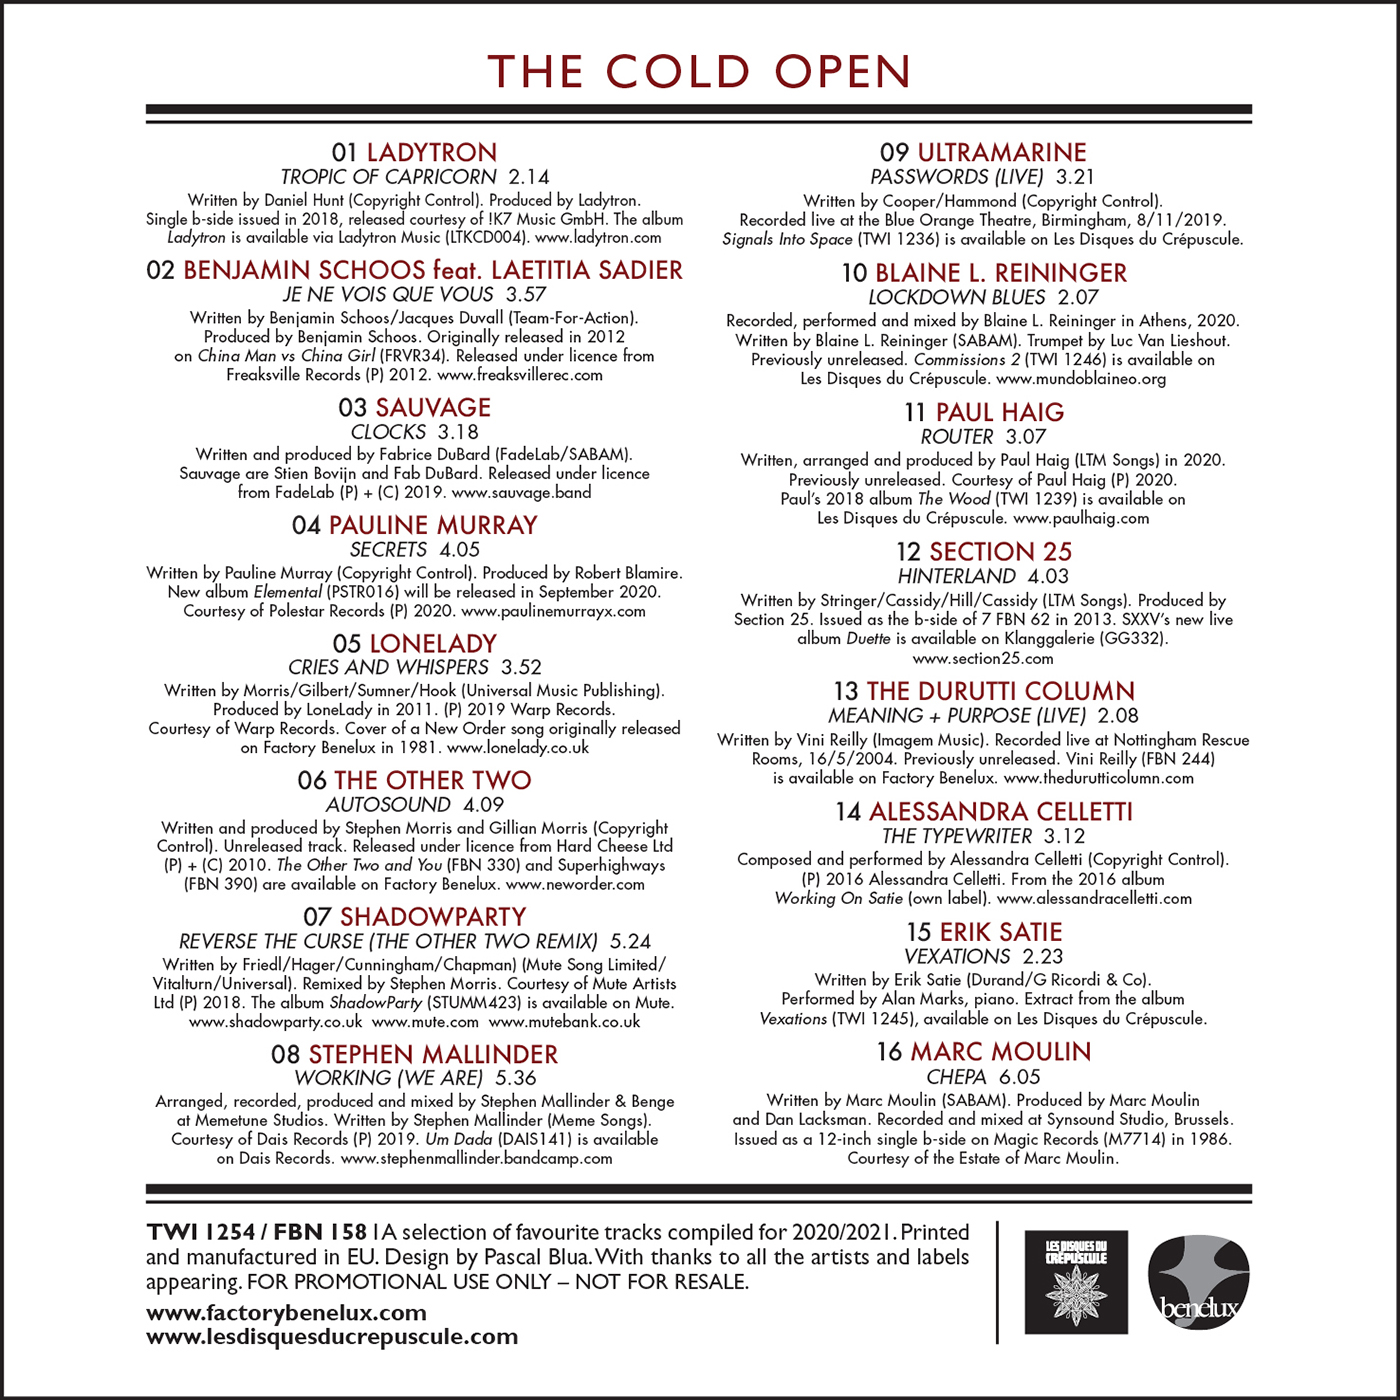 The Cold Open [FBN 158 / TWI 1254]